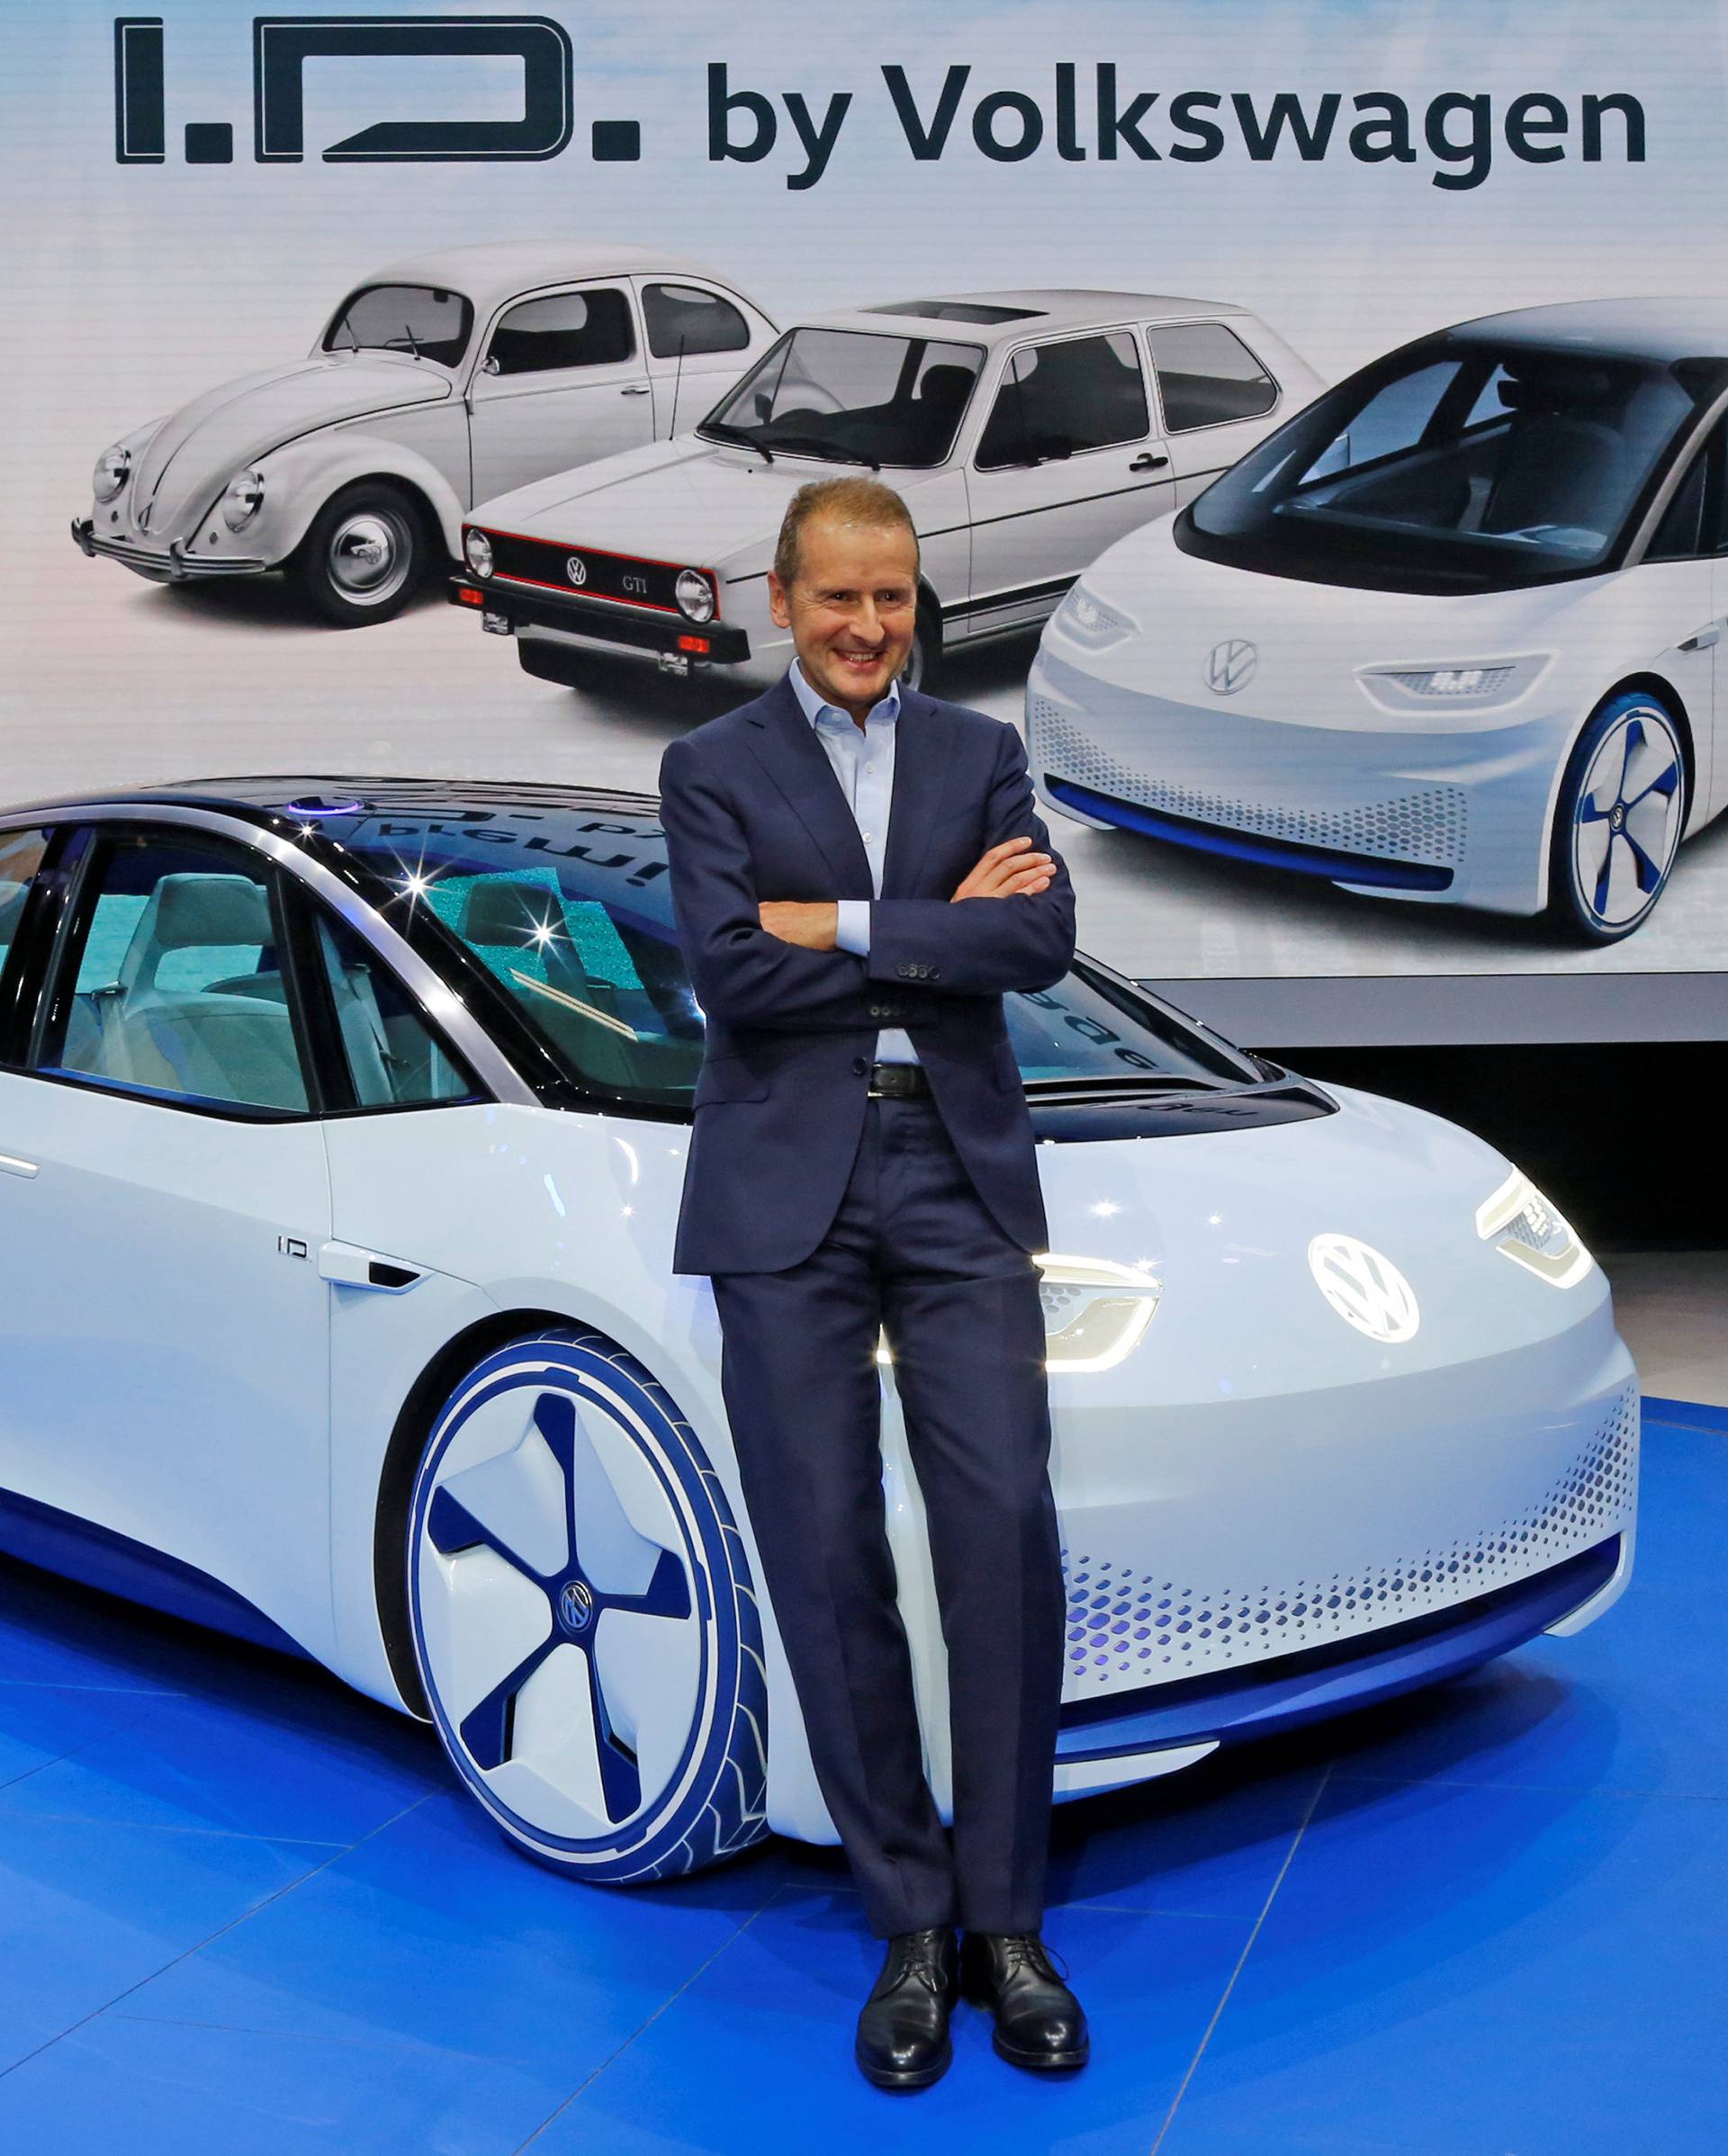 Herbert Diess, head of Volkswagen's namesake brand, poses in front of a Golf electric car on the media day at the Mondial de l'Automobile in Paris